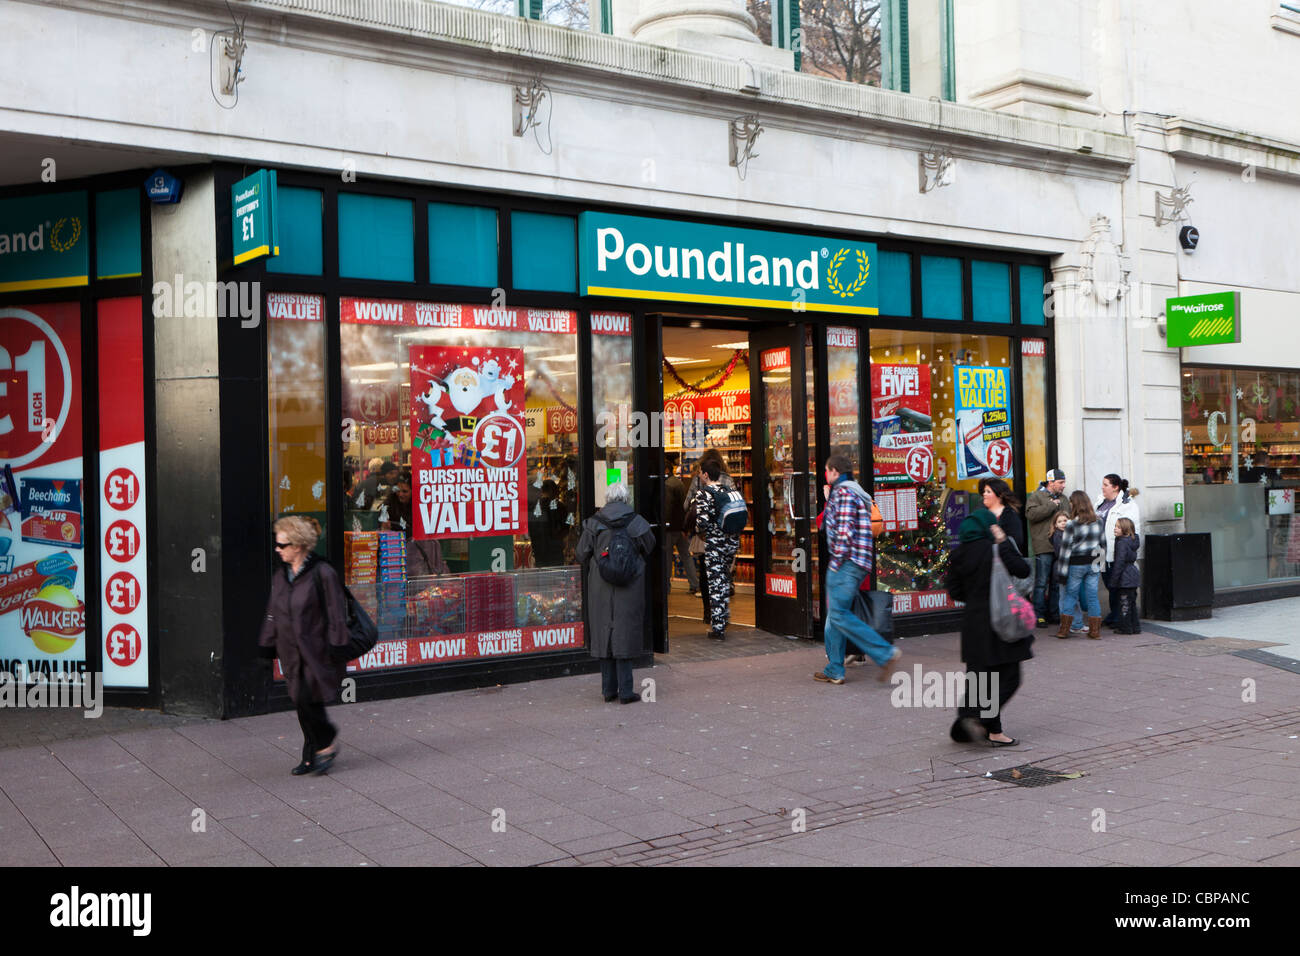 Poundland shop front with cheap goods on sale during Christmas period Cardiff Wales UK Stock Photo